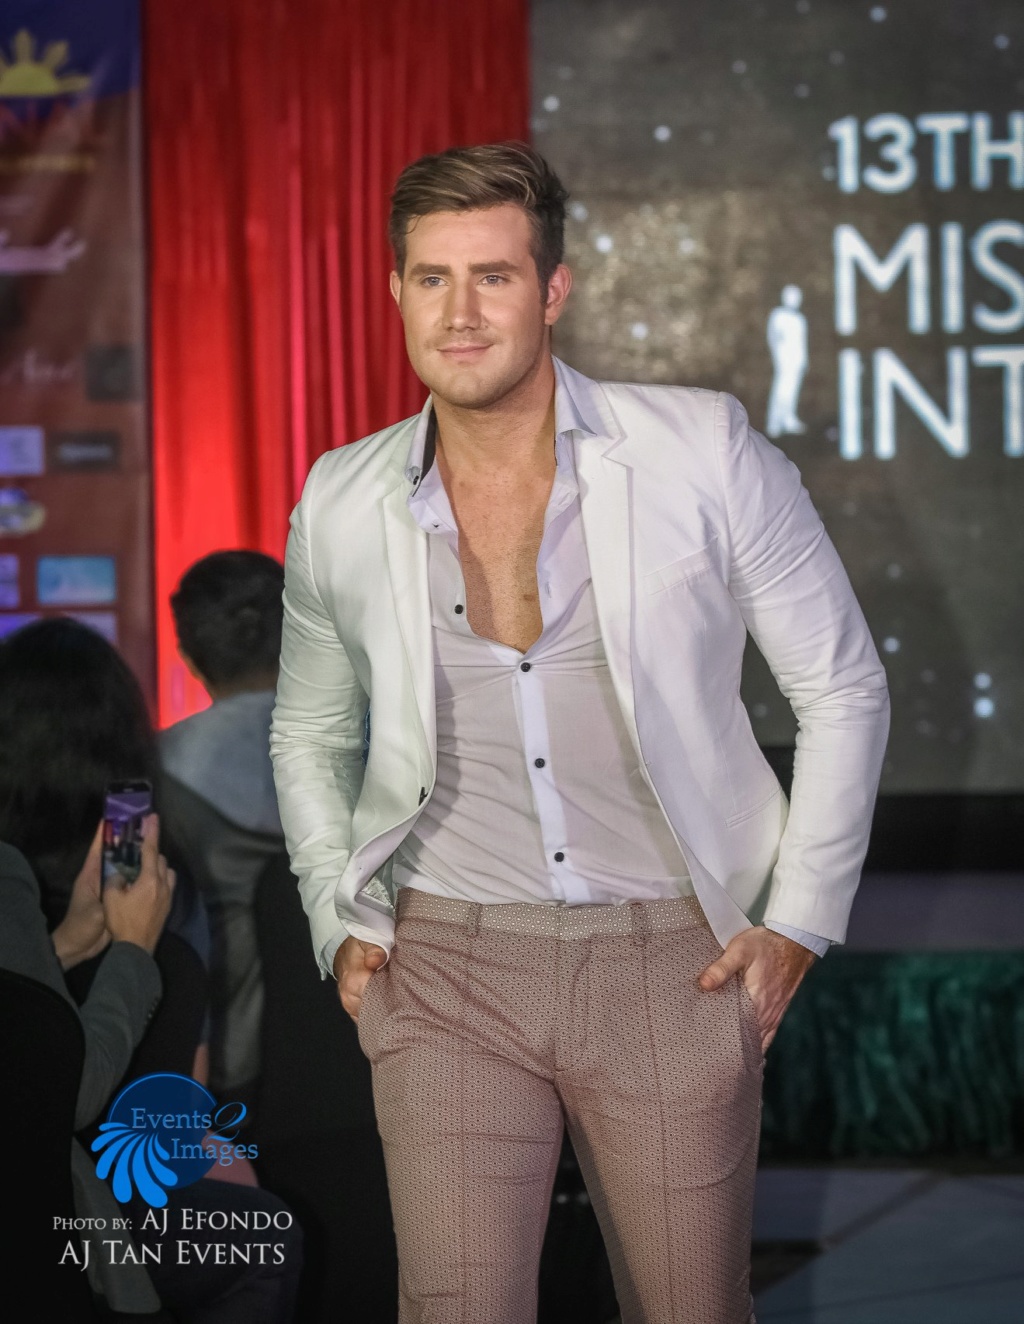 The 13th Mister International in Manila, Philippines on February 24,2019 - Page 11 52599010